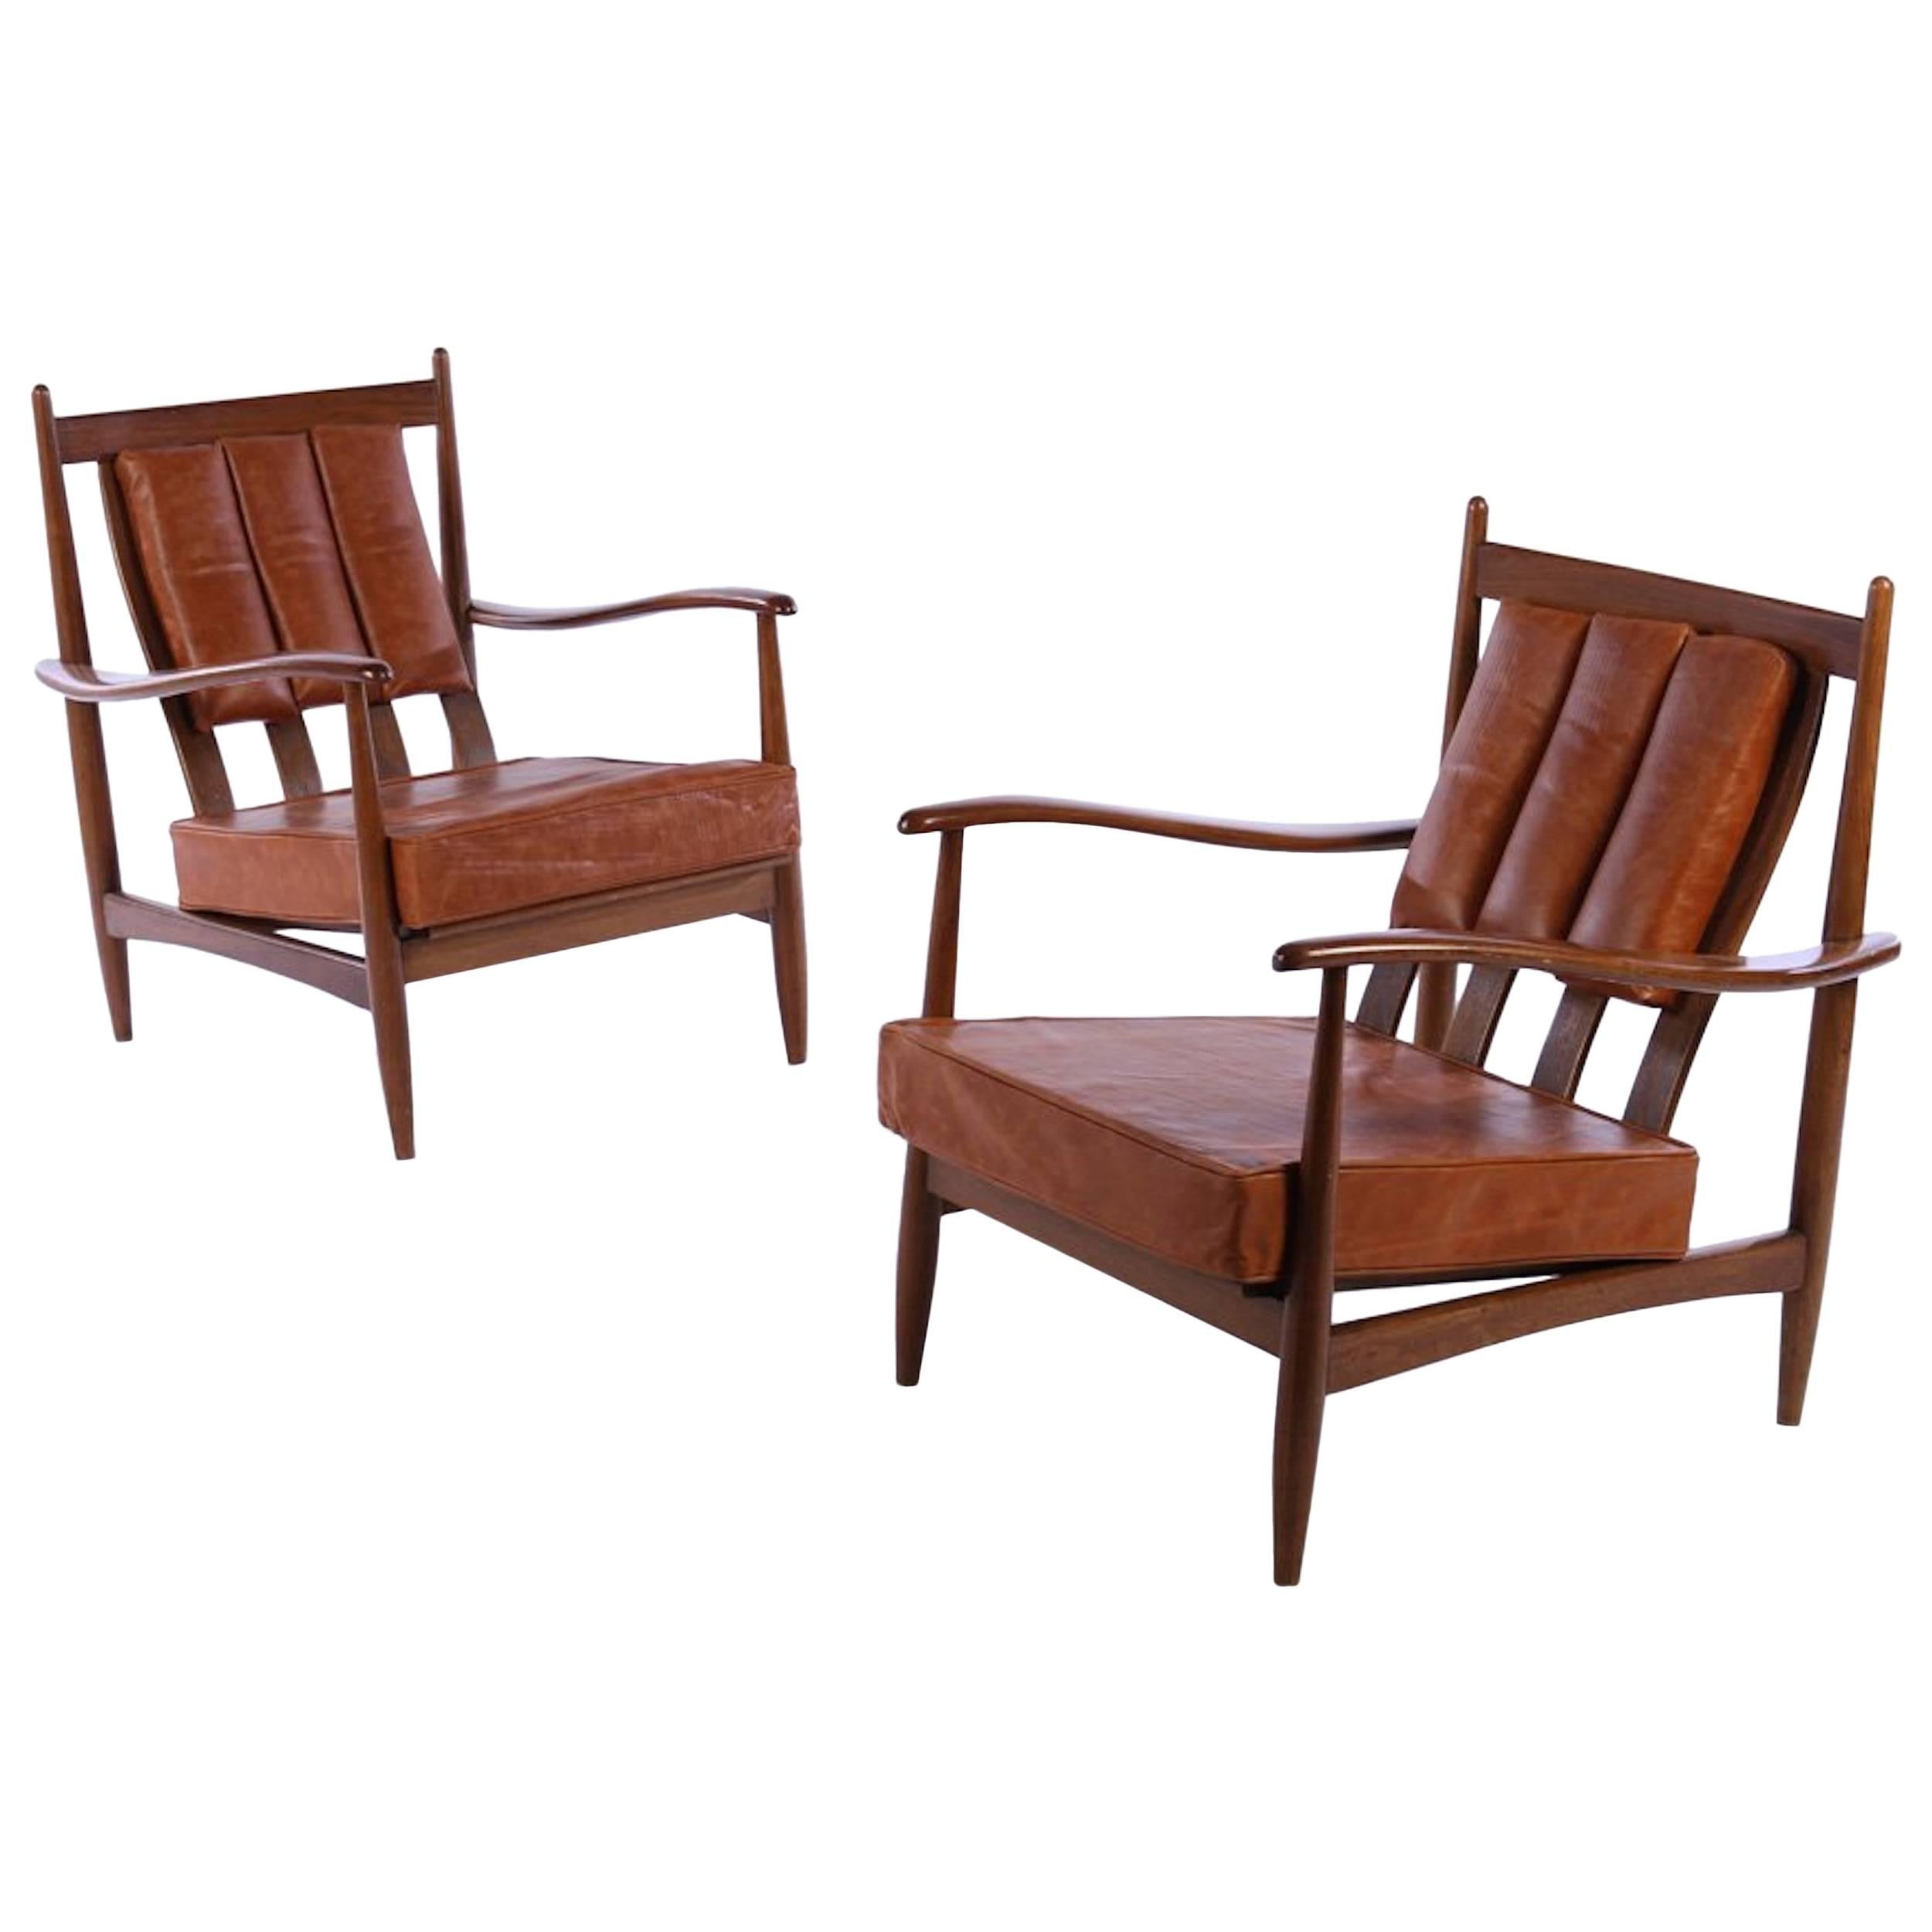 Pair of Danish Channeled Leather Lounge Chairs